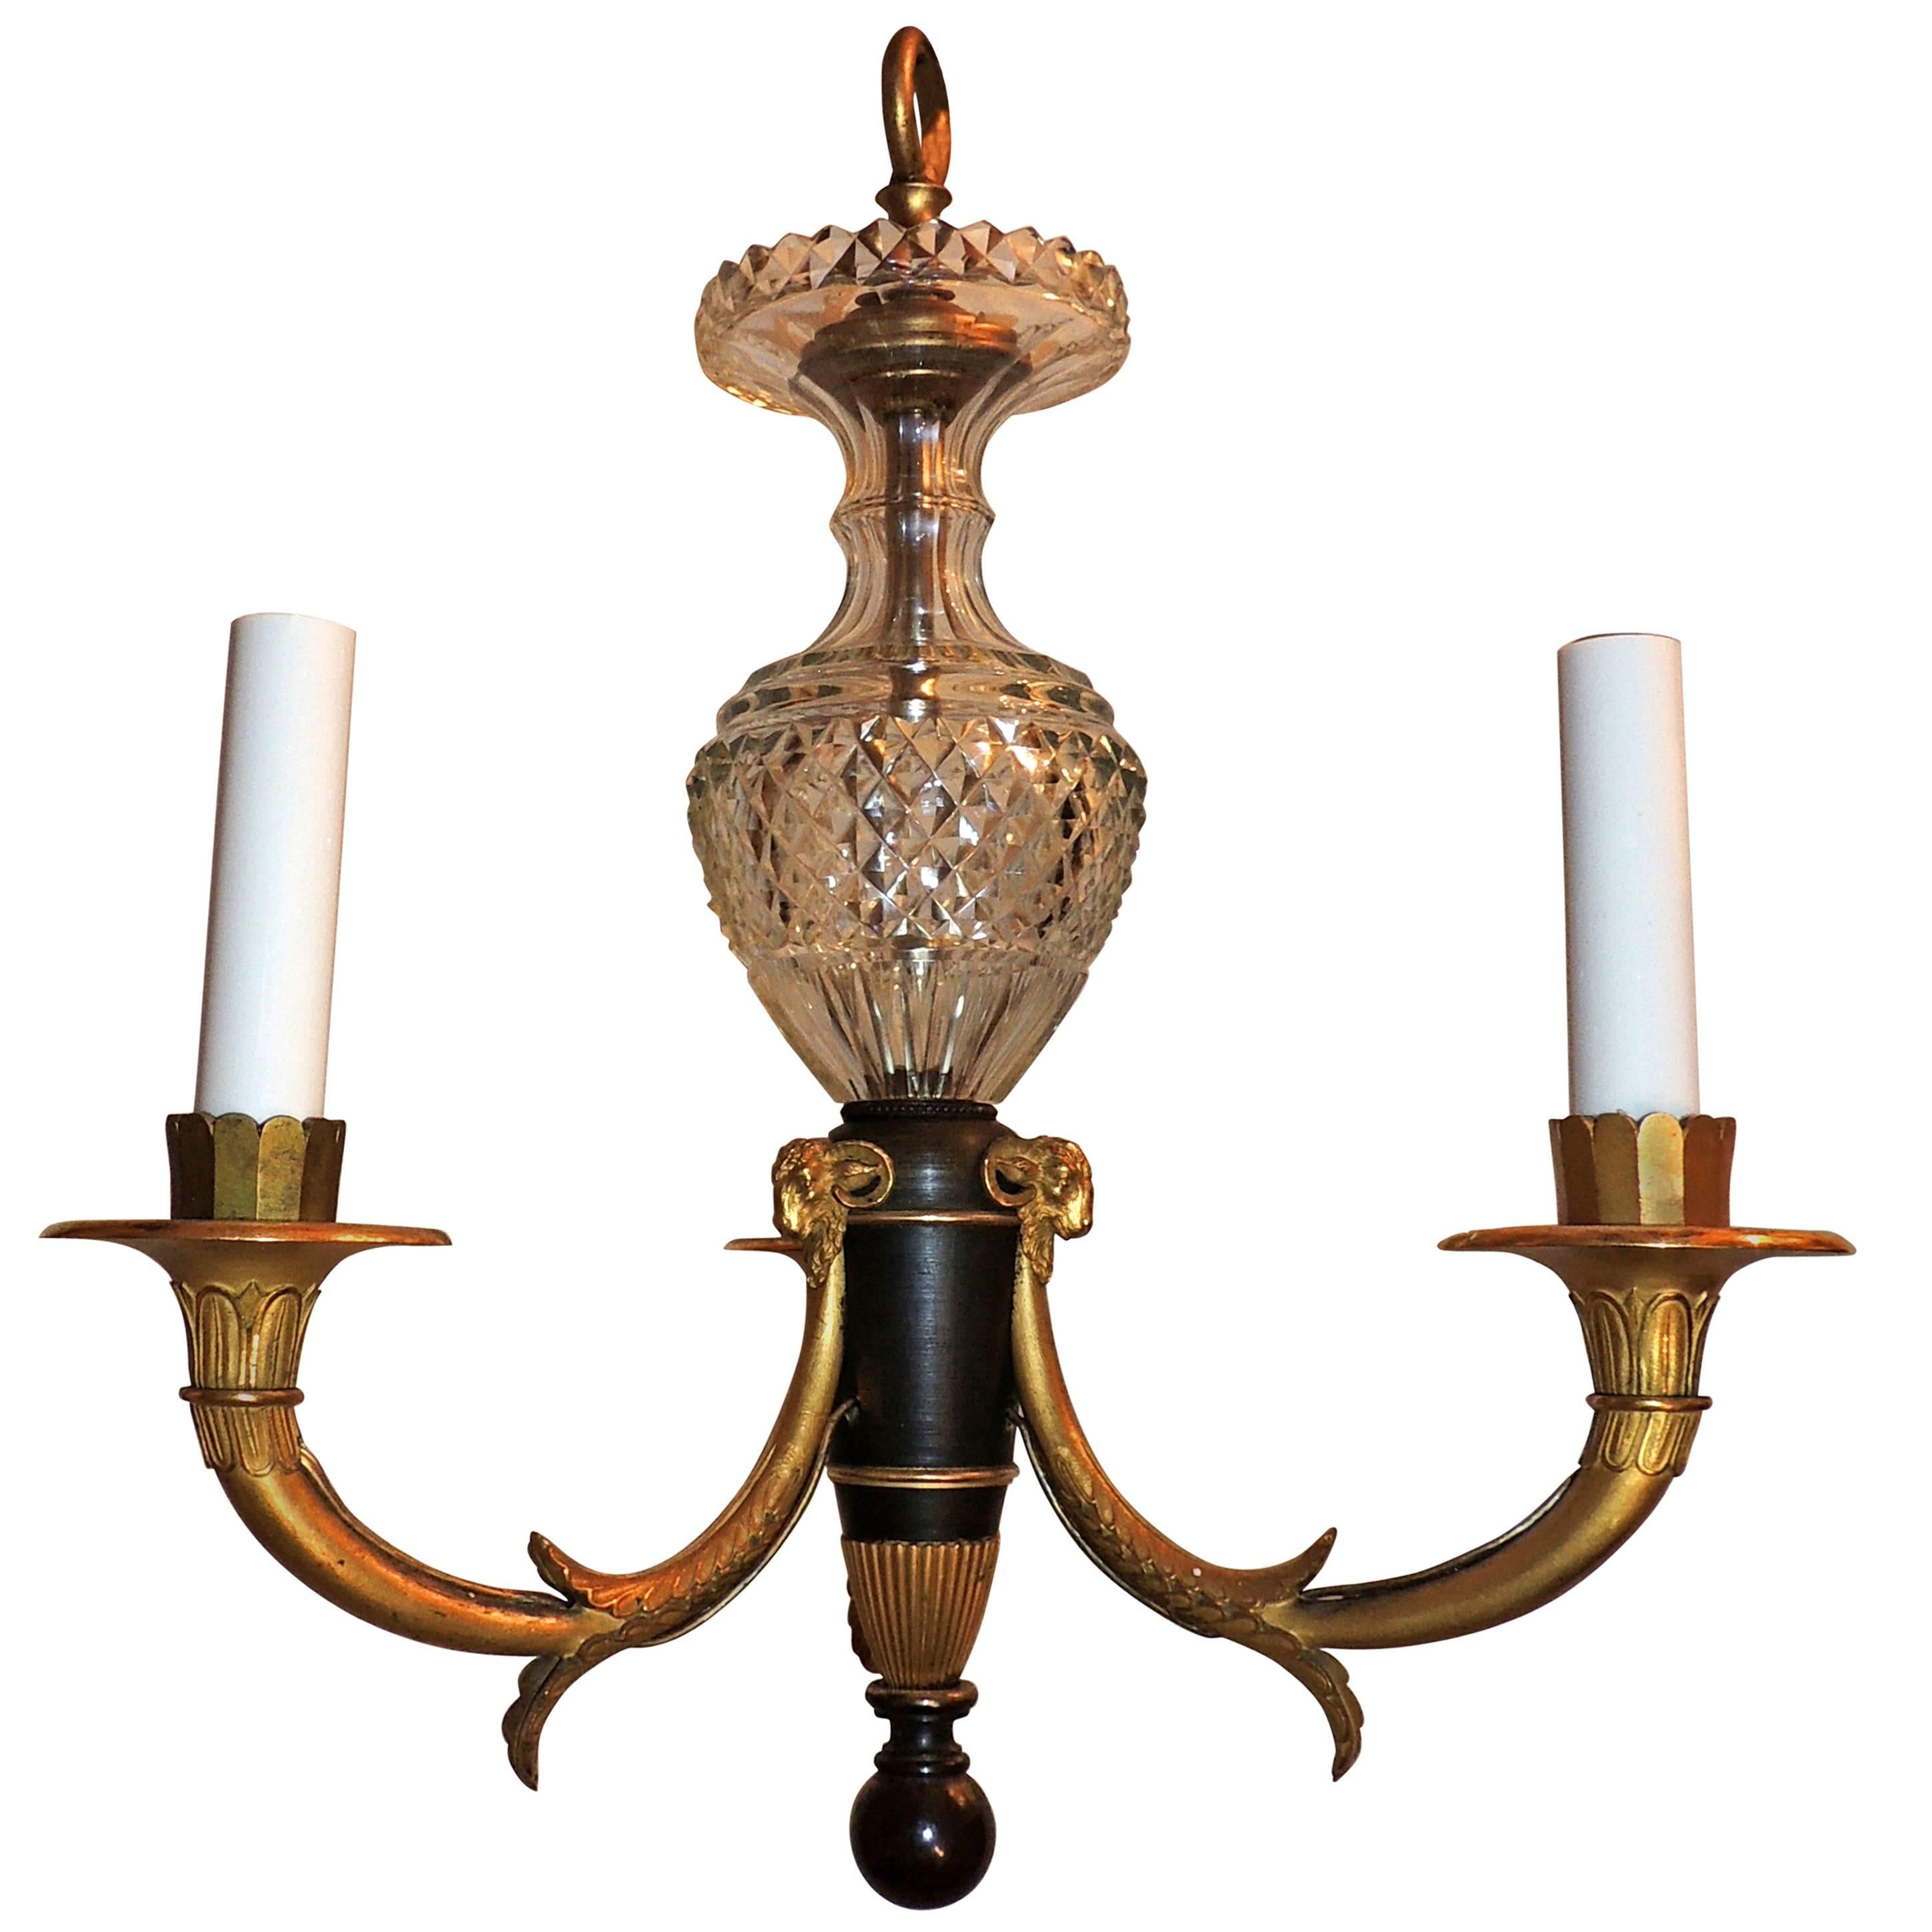 Wonderful French Empire Crystal Dore Bronze and Patina Neoclassical Chandelier